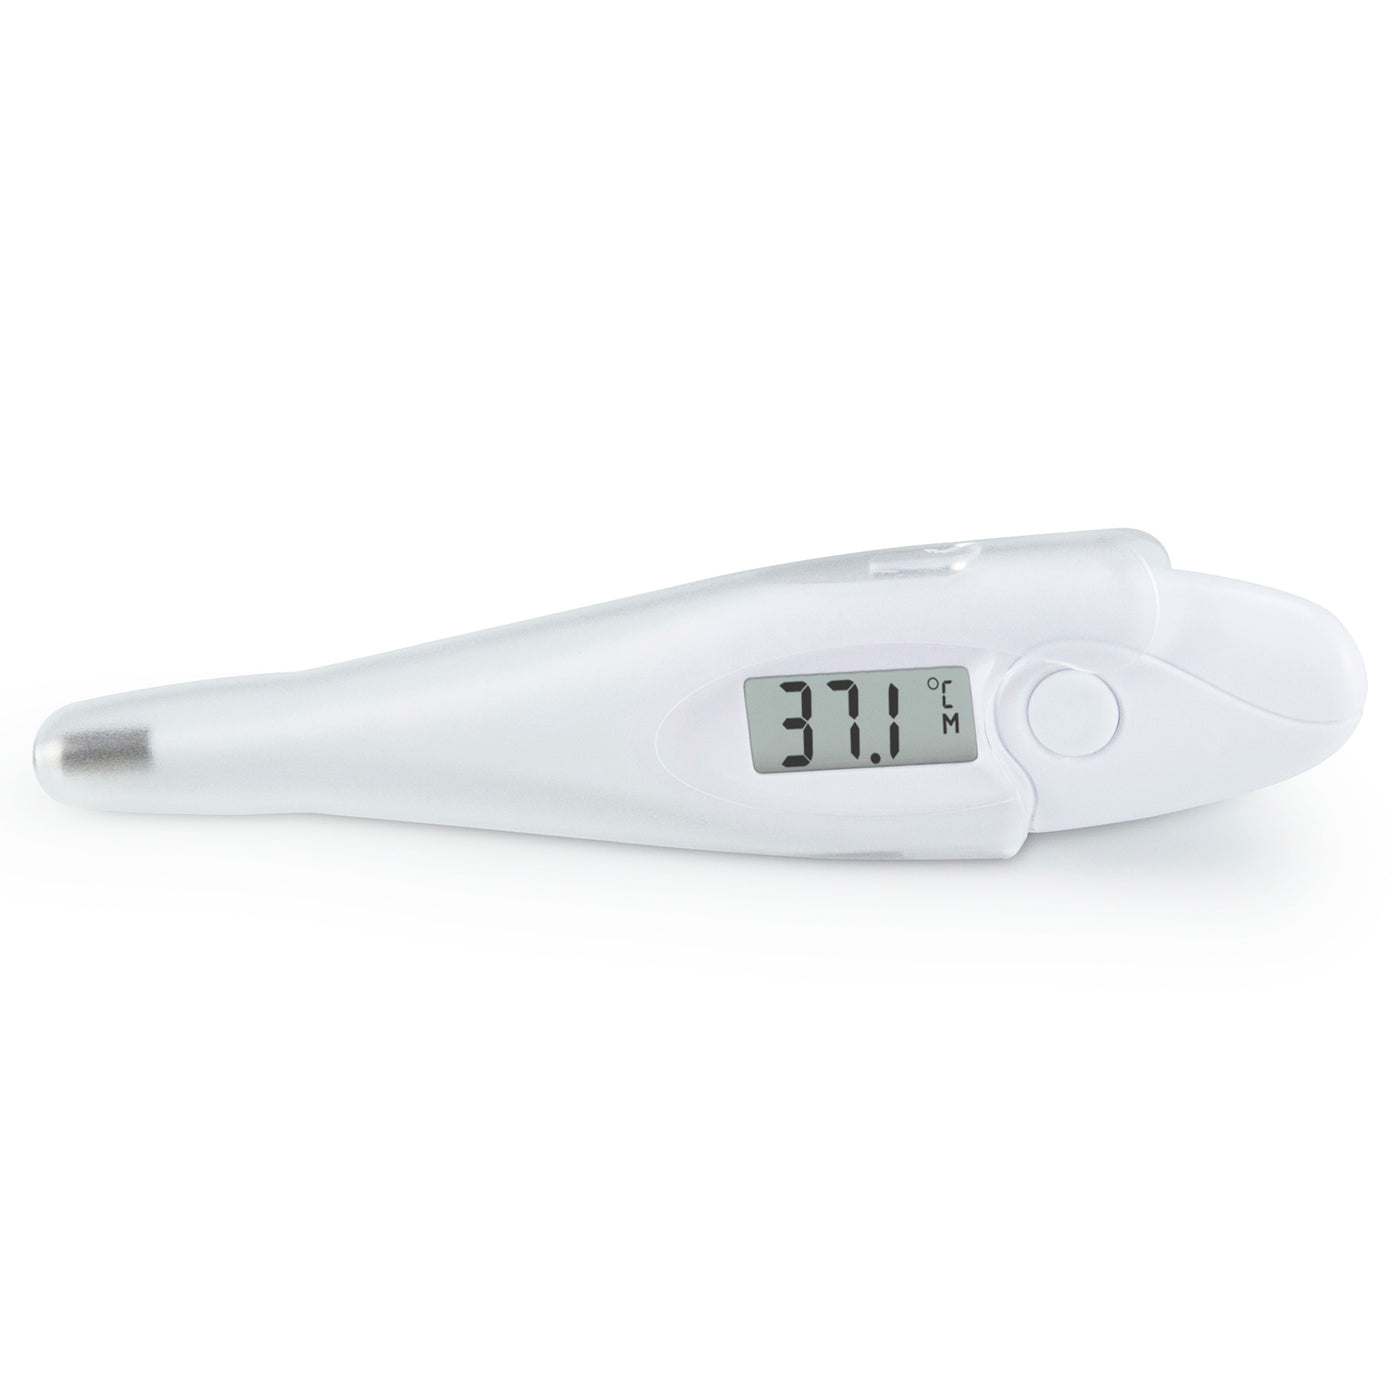 Alecto BC-04 - Baby Thermometerset 2-teilig, weiß